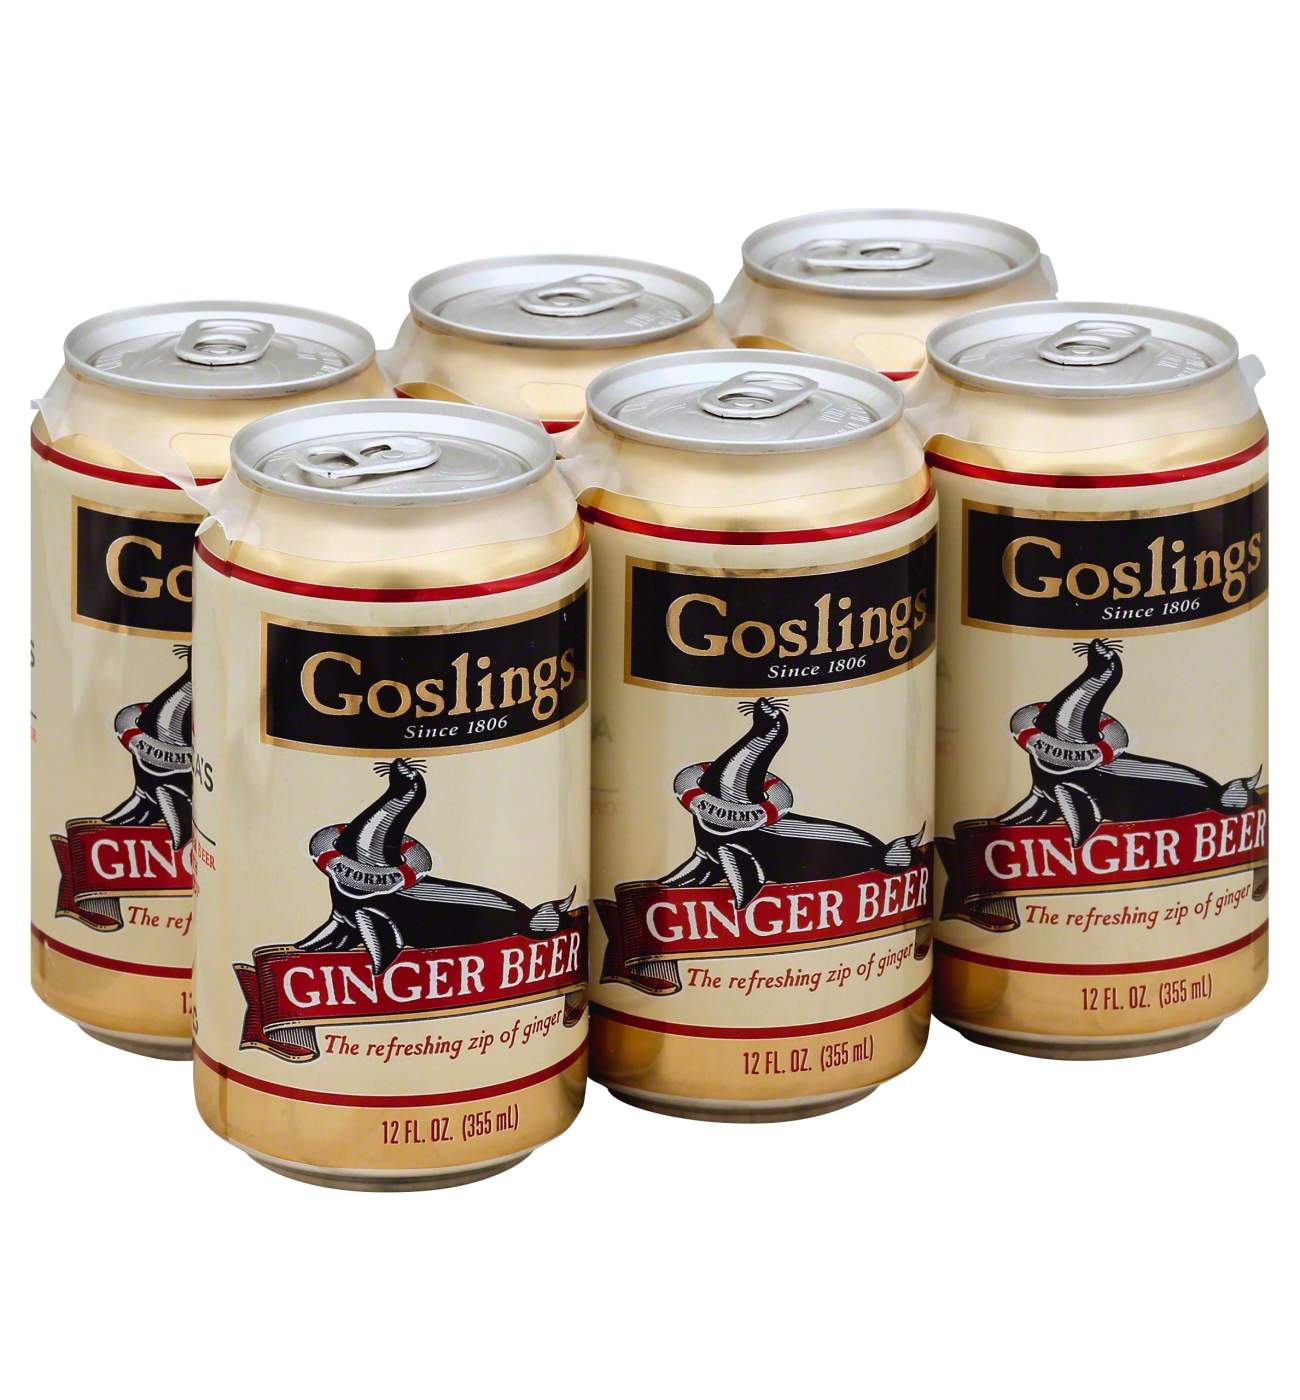 Gosling's Stormy Ginger Beer 12 oz Cans; image 1 of 2